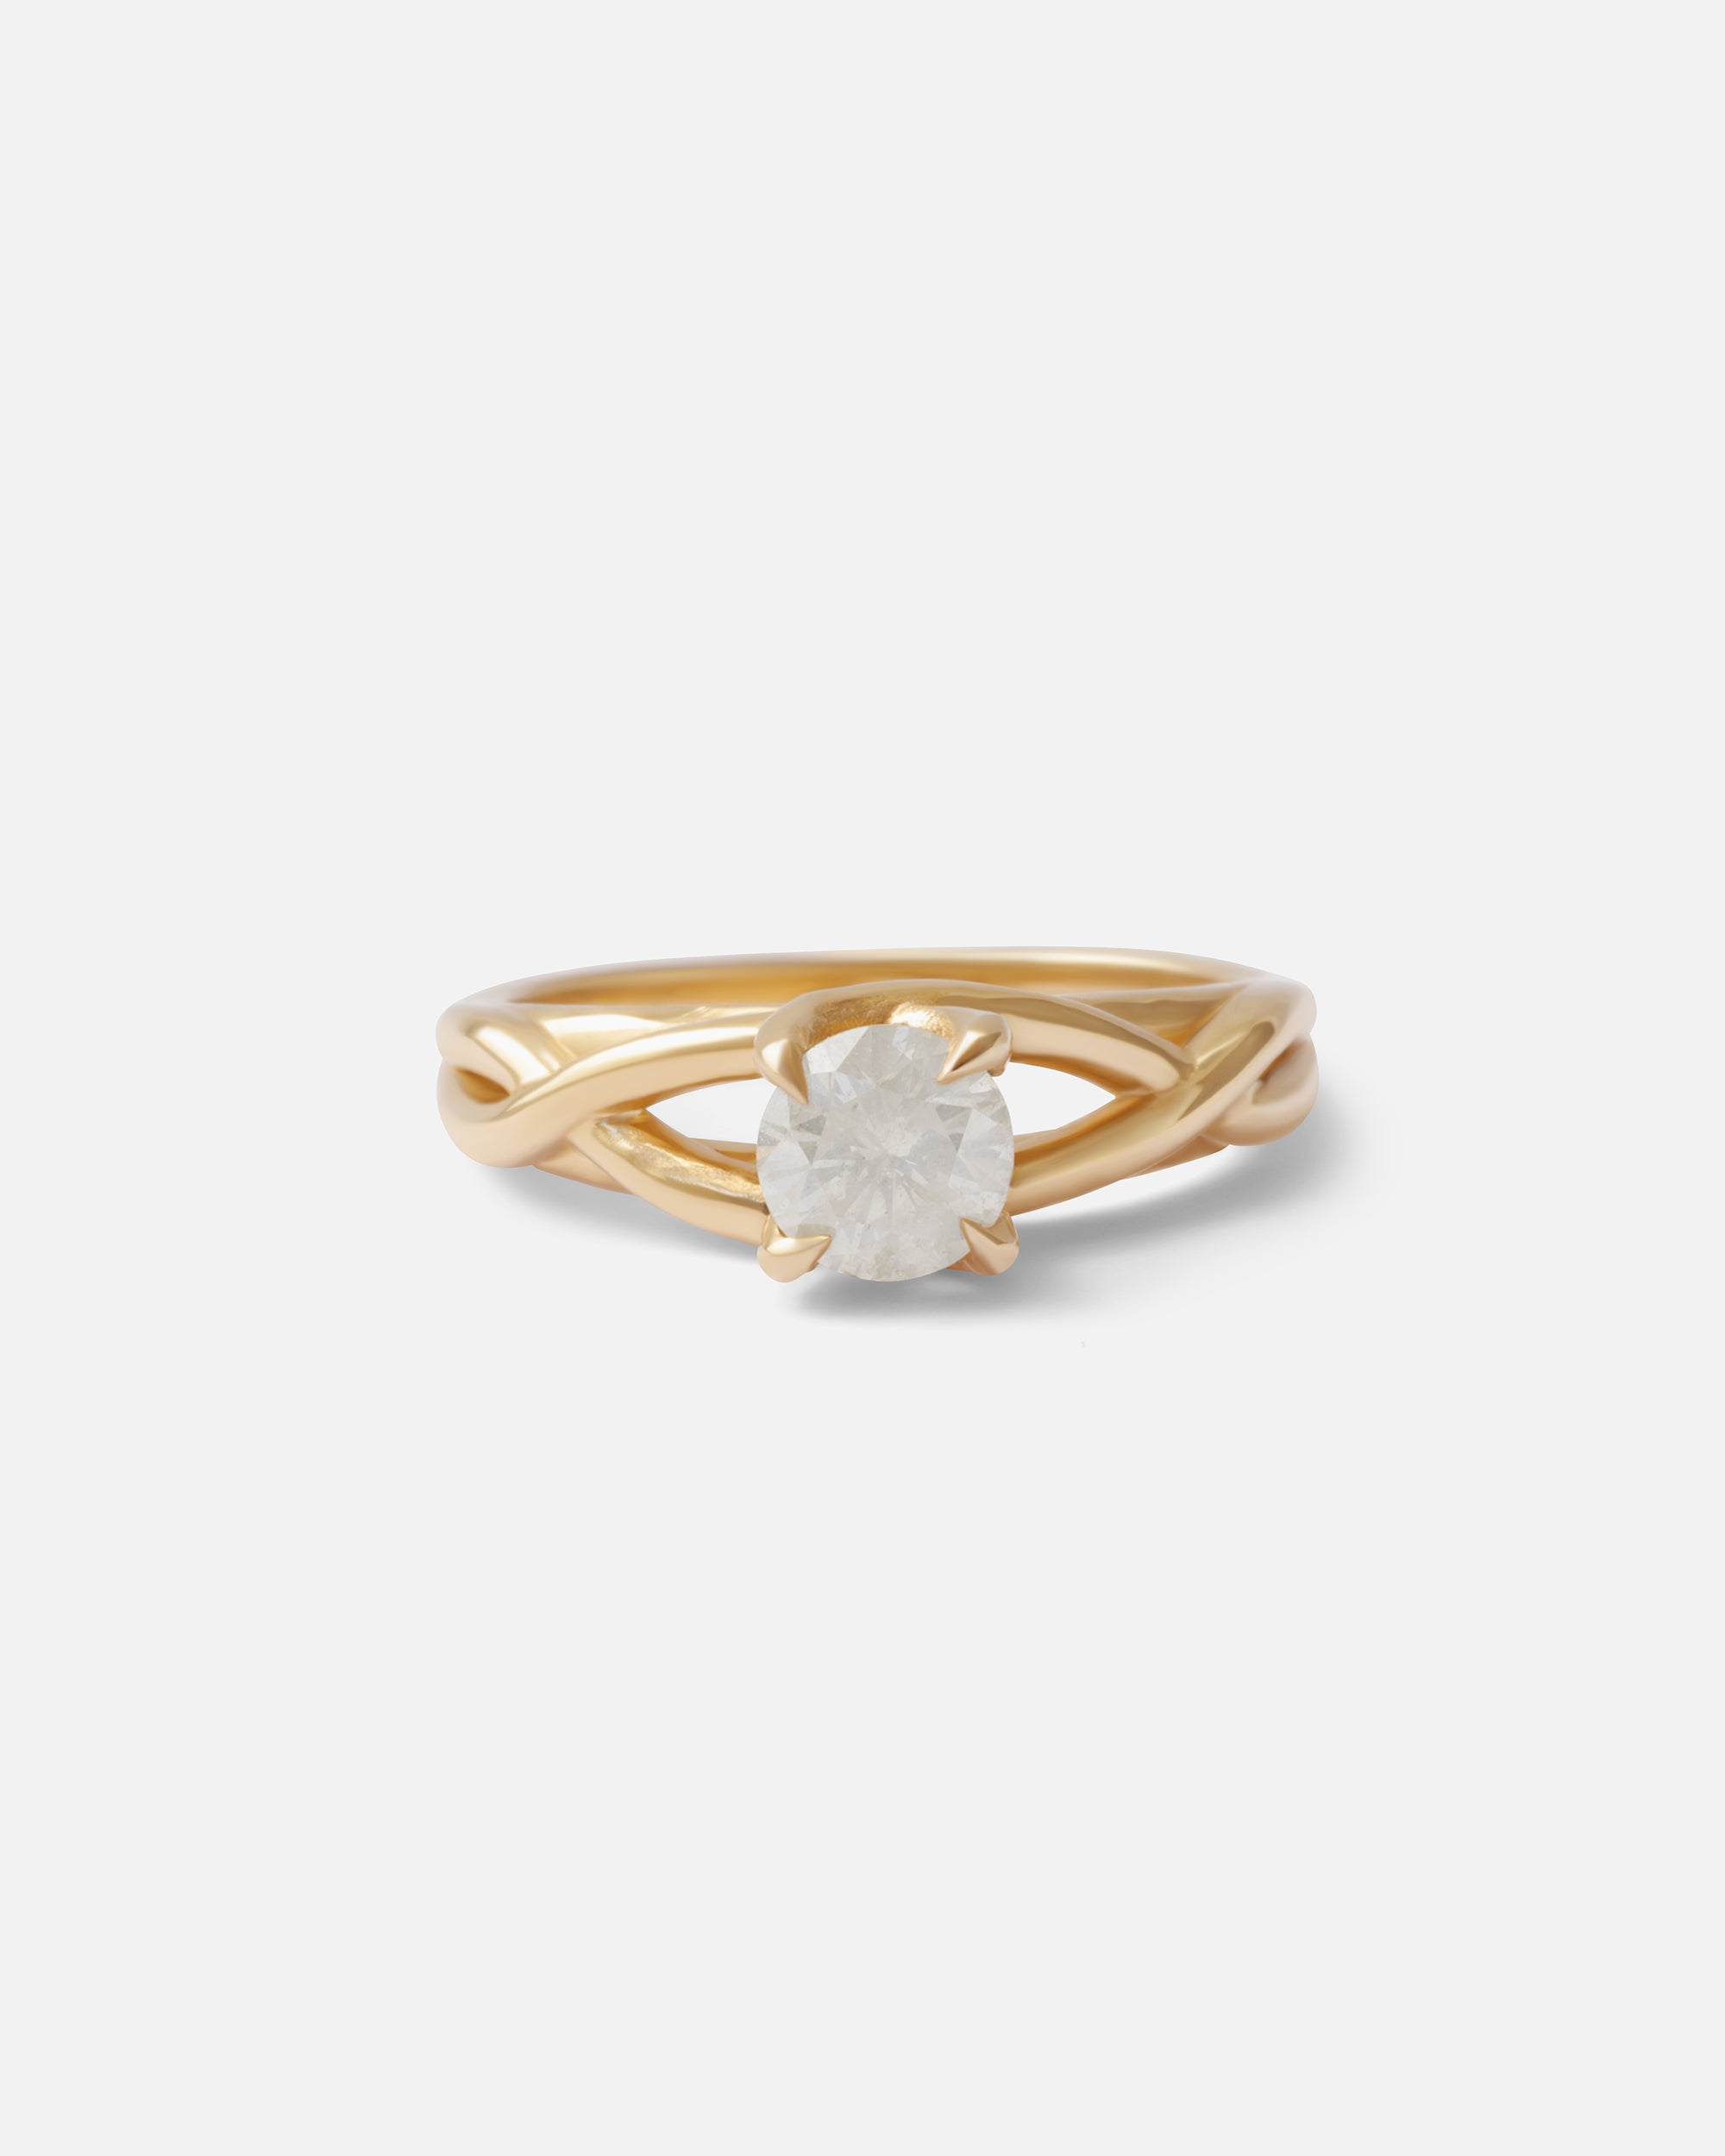 Twist Solitaire Ring By Kestrel Dillon